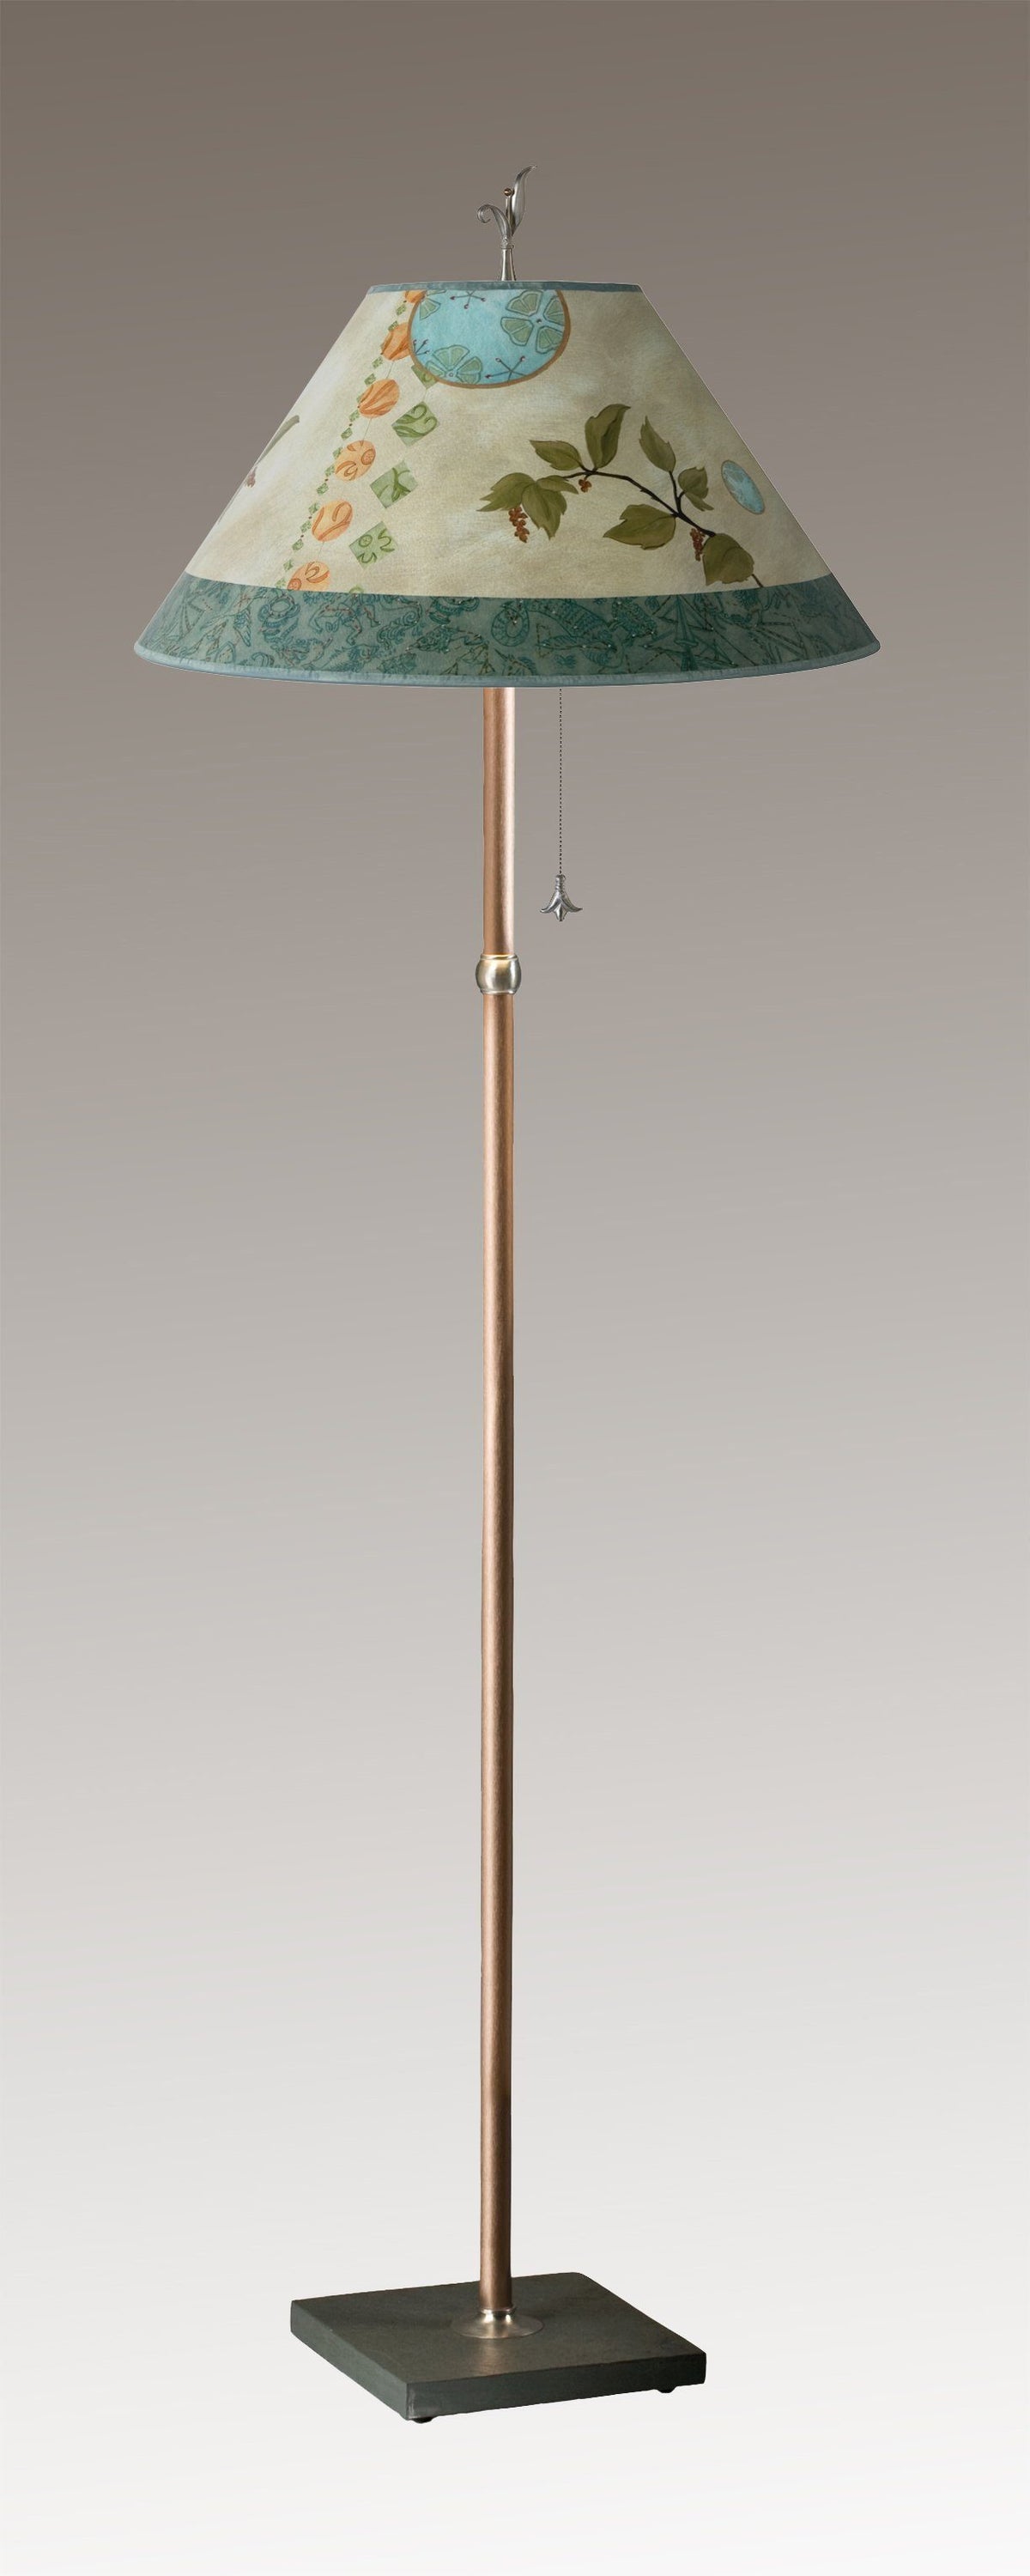 Janna Ugone &amp; Co Floor Lamps Copper Floor Lamp with Large Conical Shade in Celestial Leaf